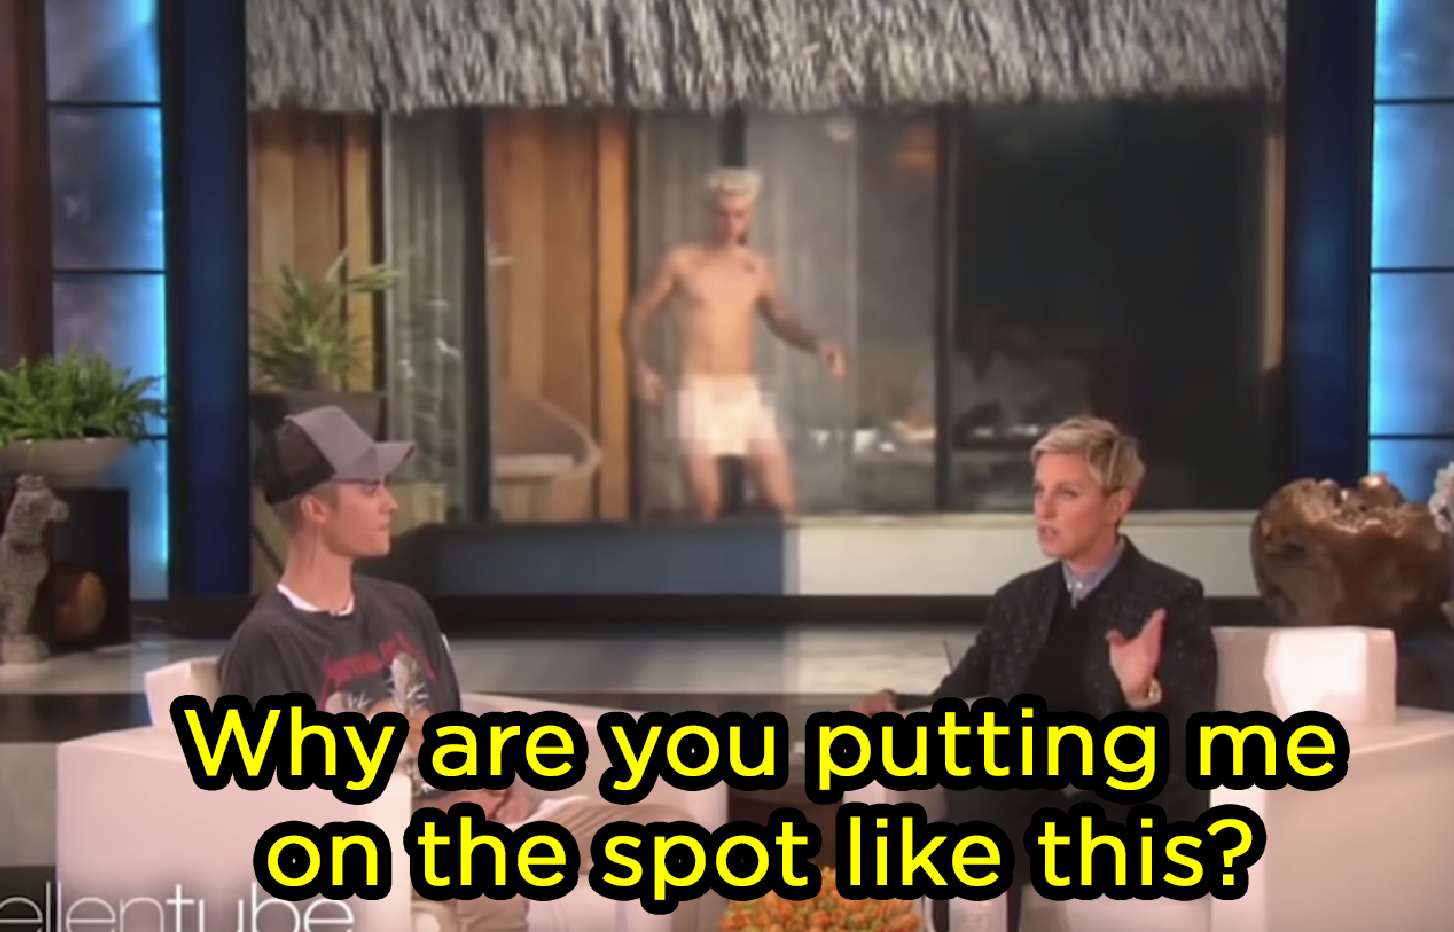 Justin Bieber asking Ellen, &quot;Why are you putting me on the spot like this?&quot;